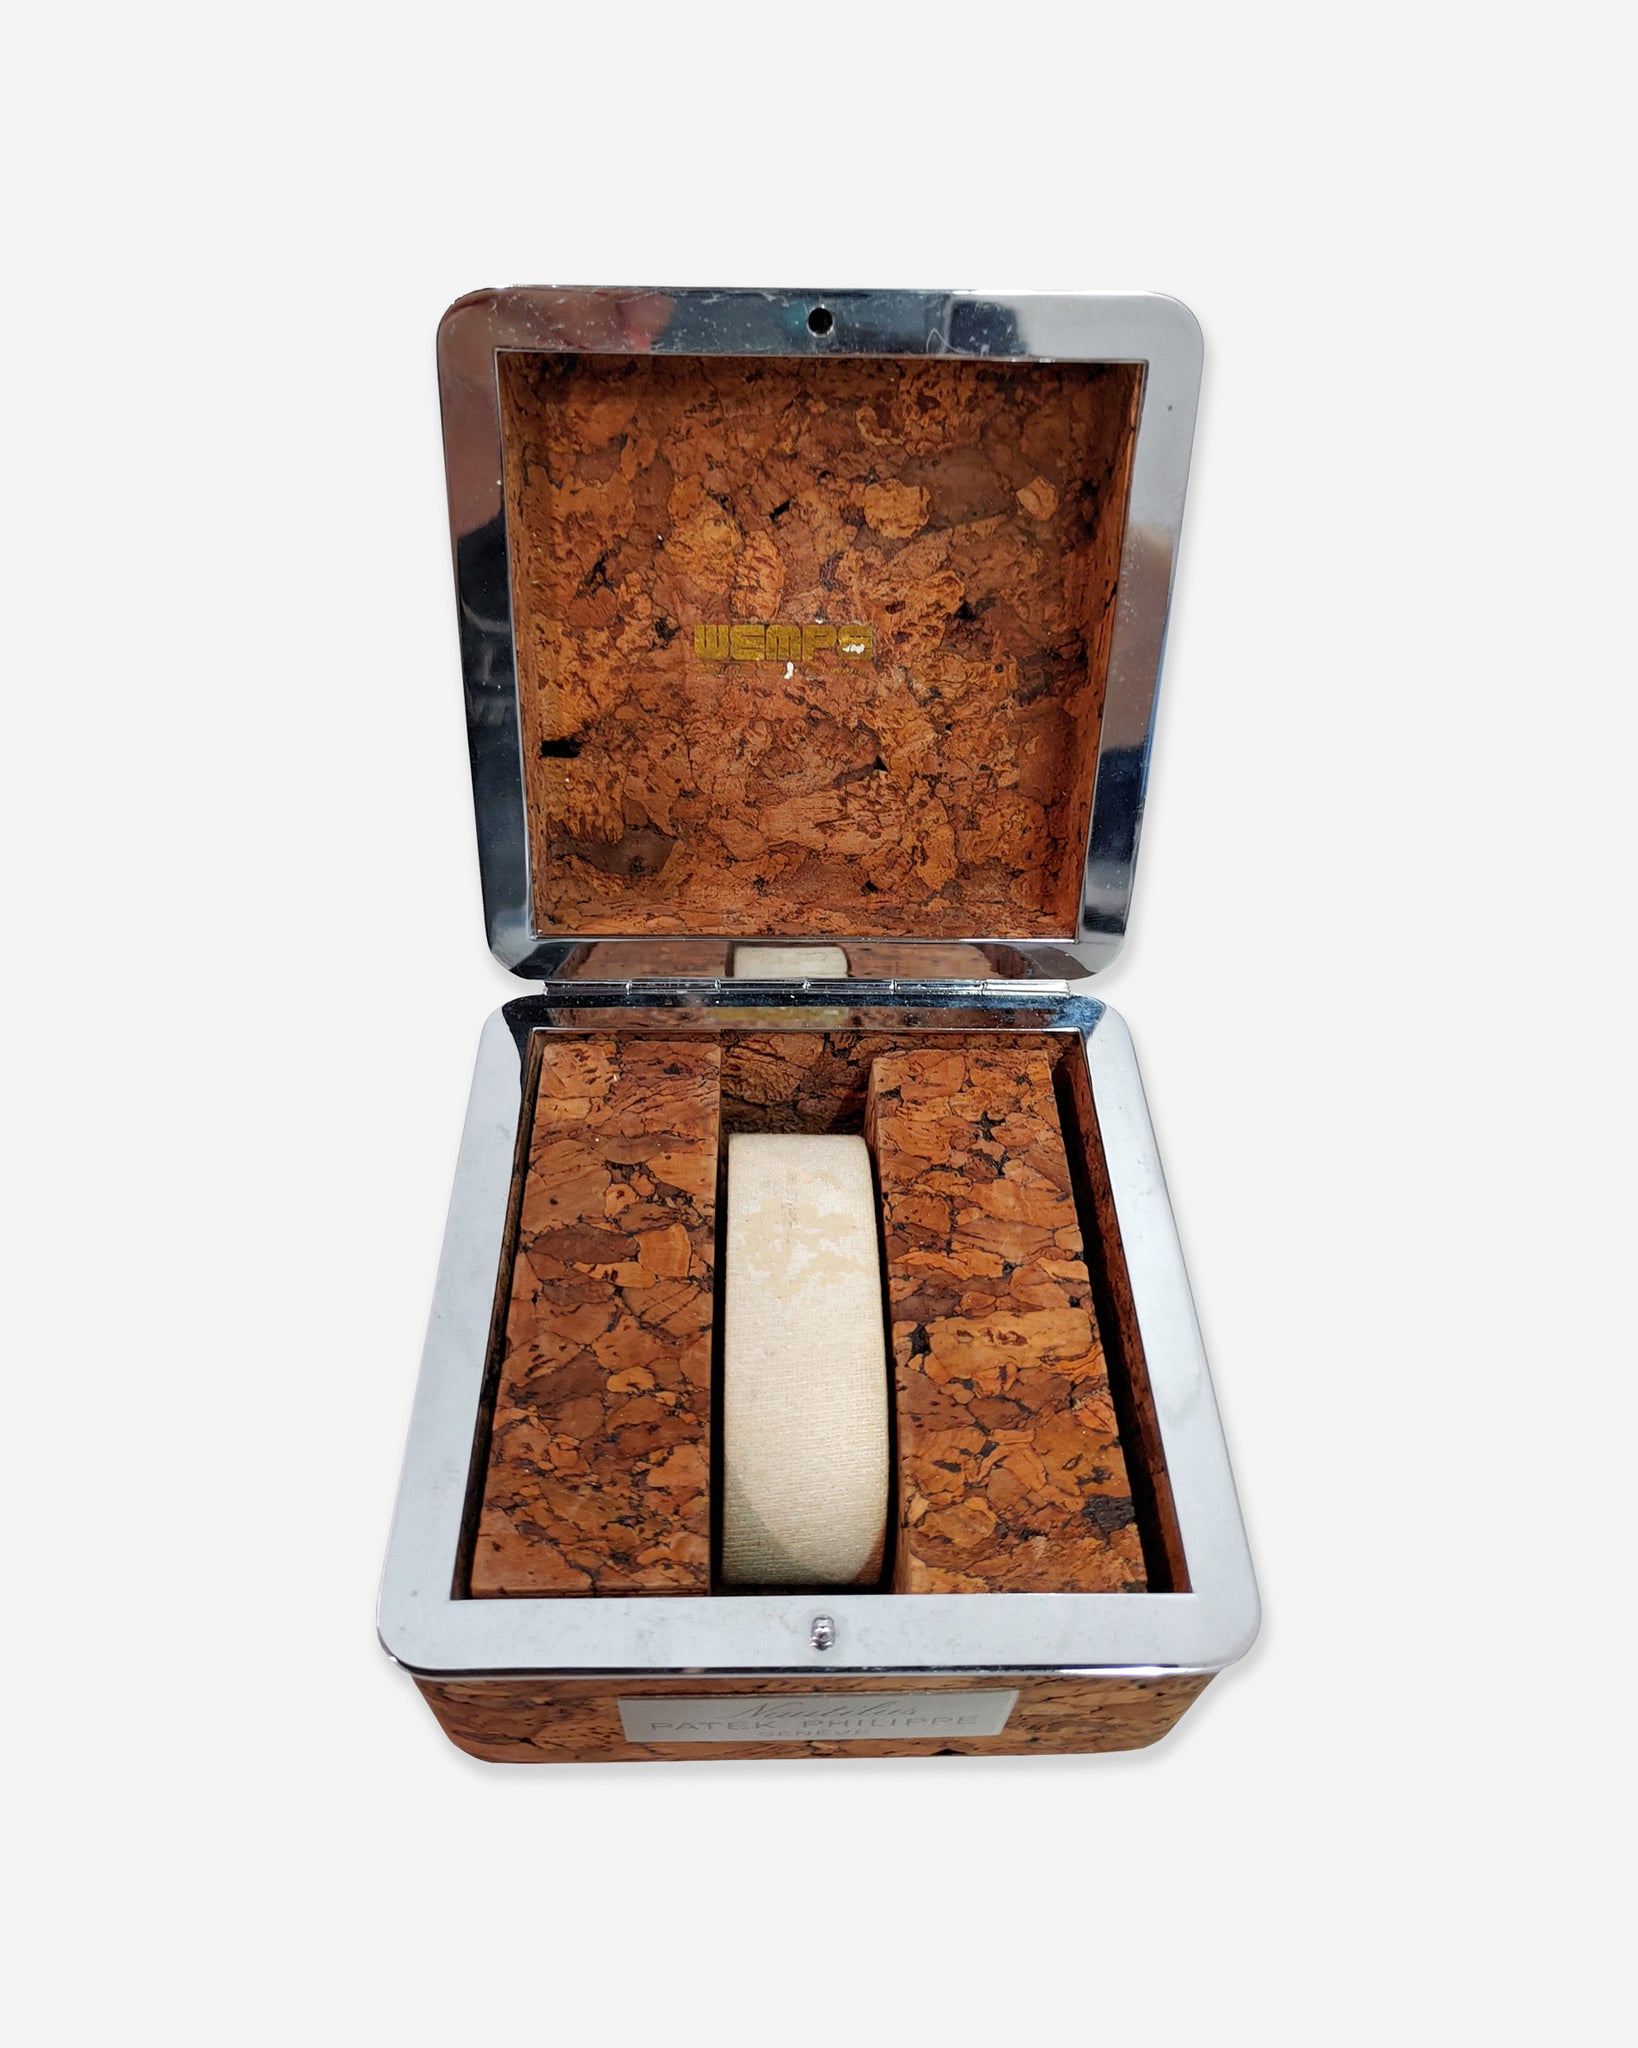 Patek Philippe 3700 cork box double signed by Wempe